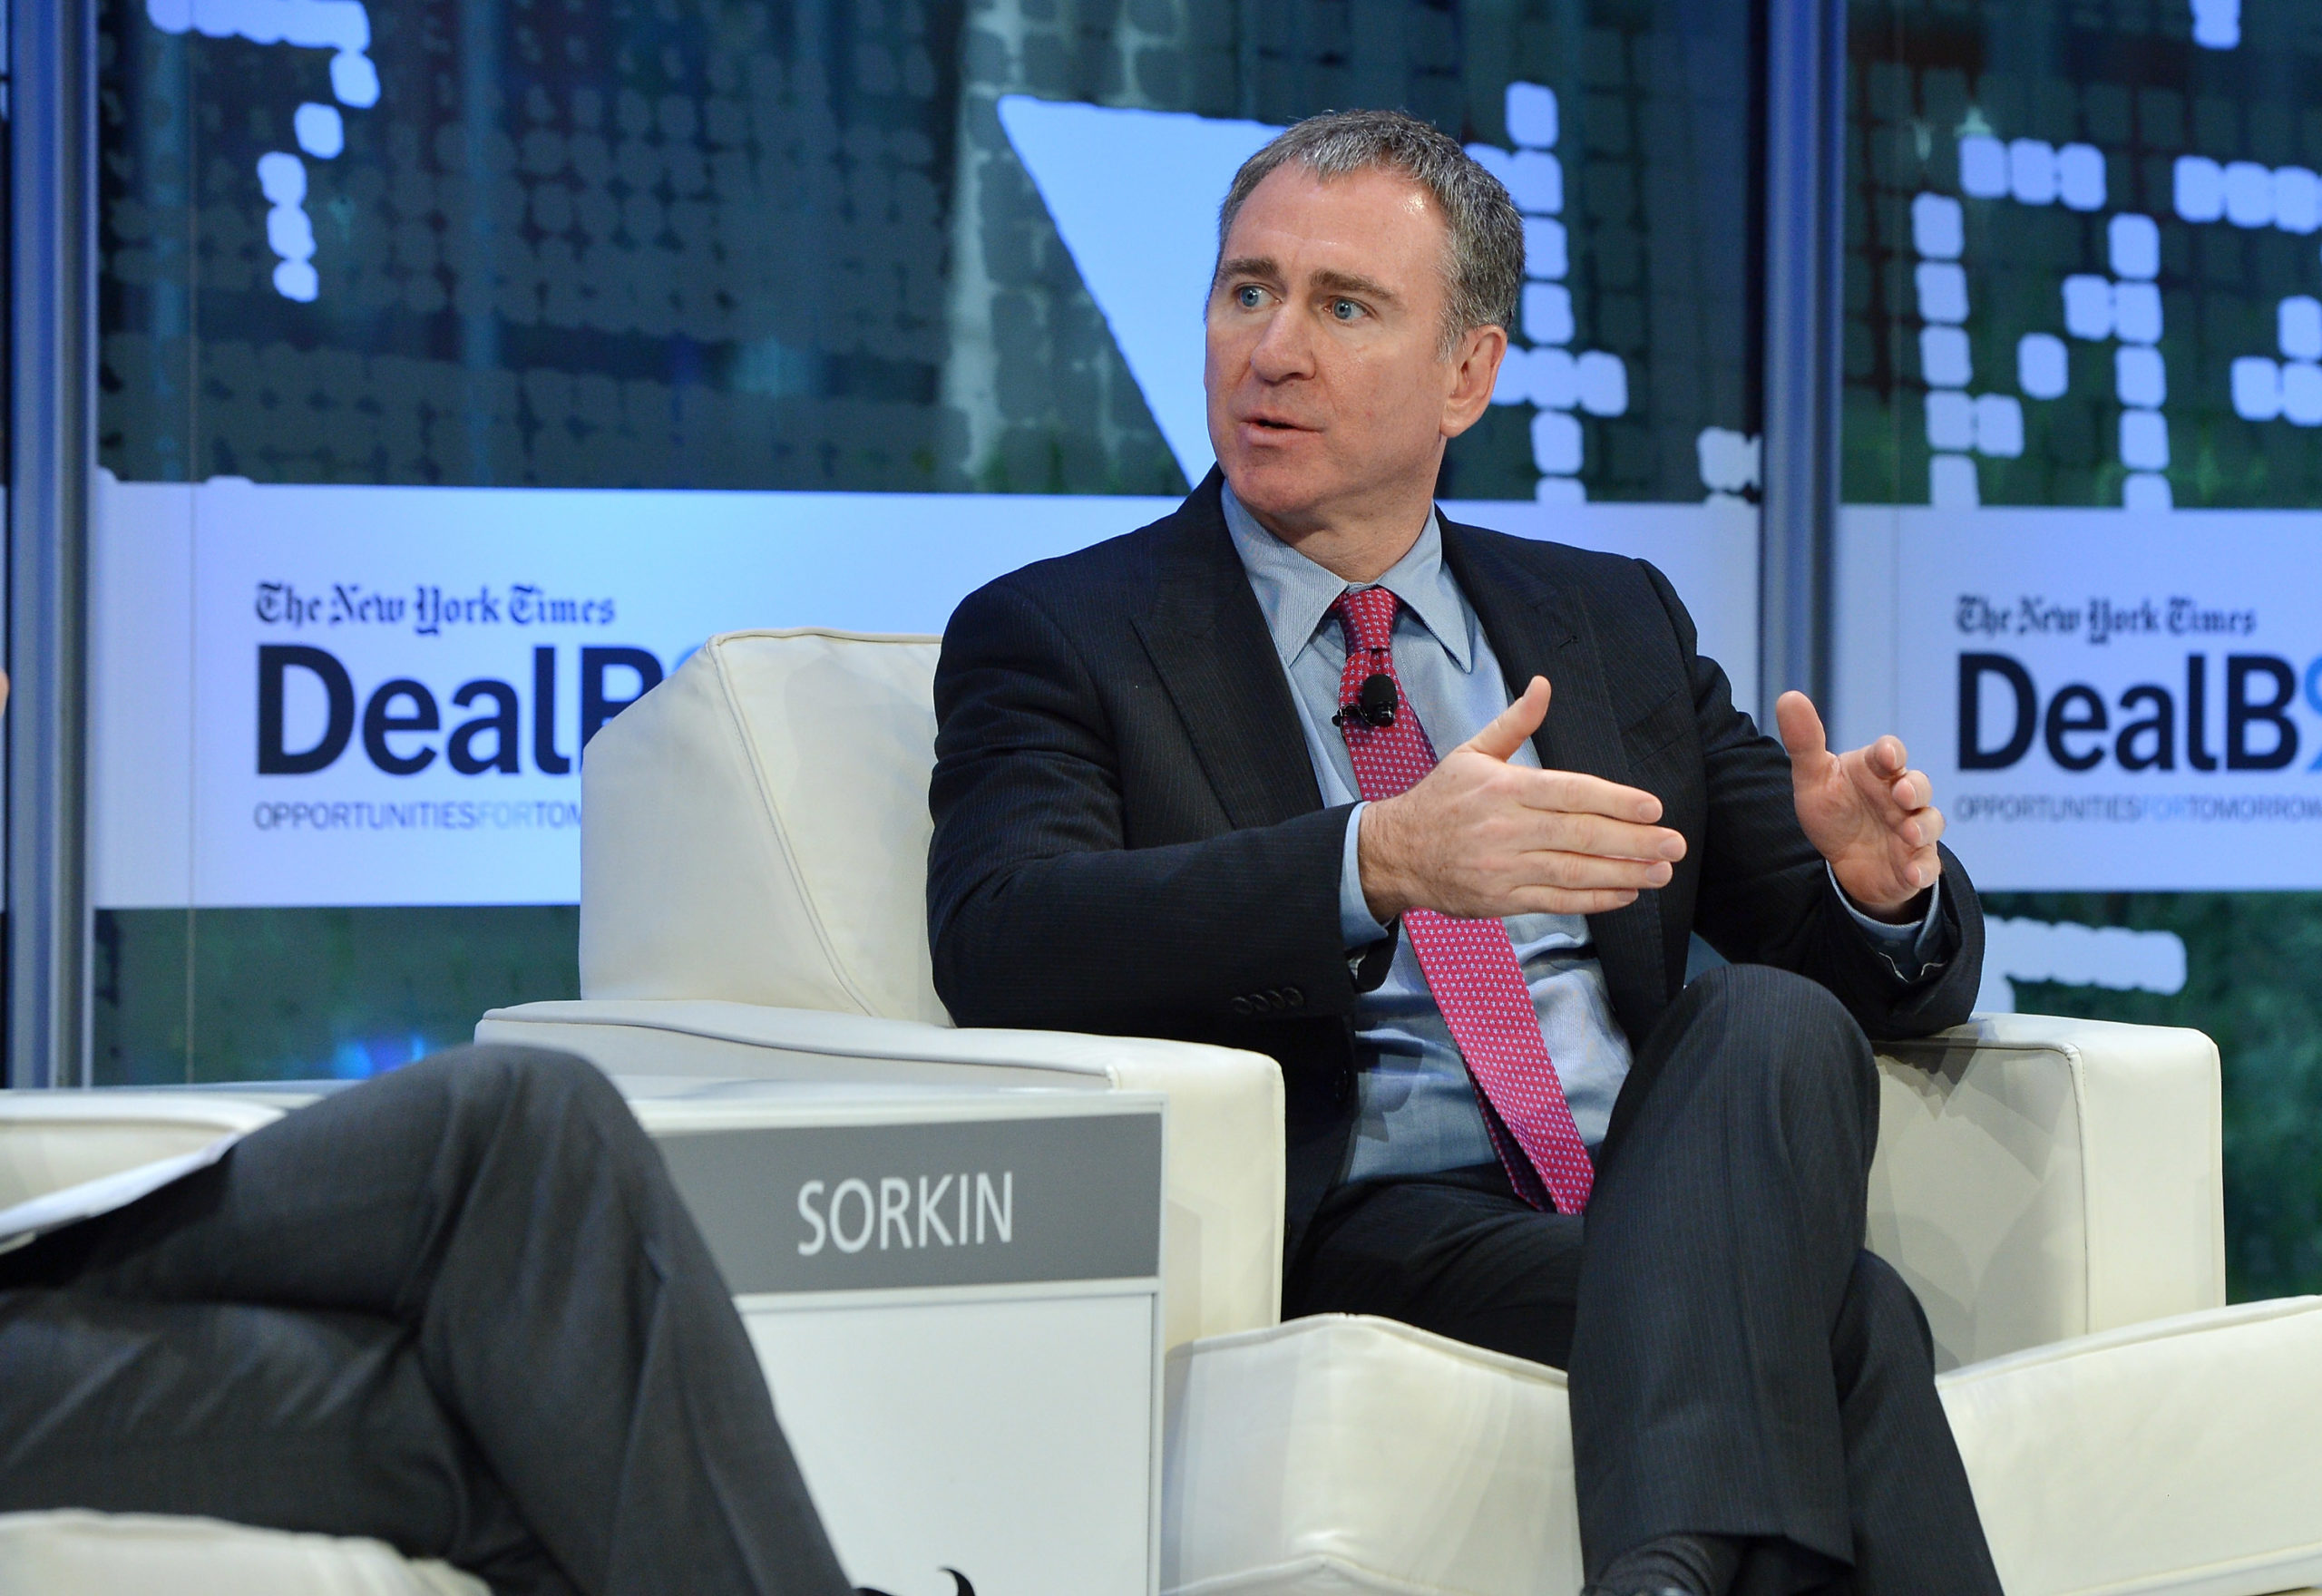 NEW YORK, NY - NOVEMBER 12: Founder and CEO at Citadel LLC Kenneth C. Griffin participate in a discussion at the New York Times 2013 DealBook Conference in New York at the New York Times Building on November 12, 2013 in New York City. (Photo by Larry Busacca/Getty Images for The New York Times)